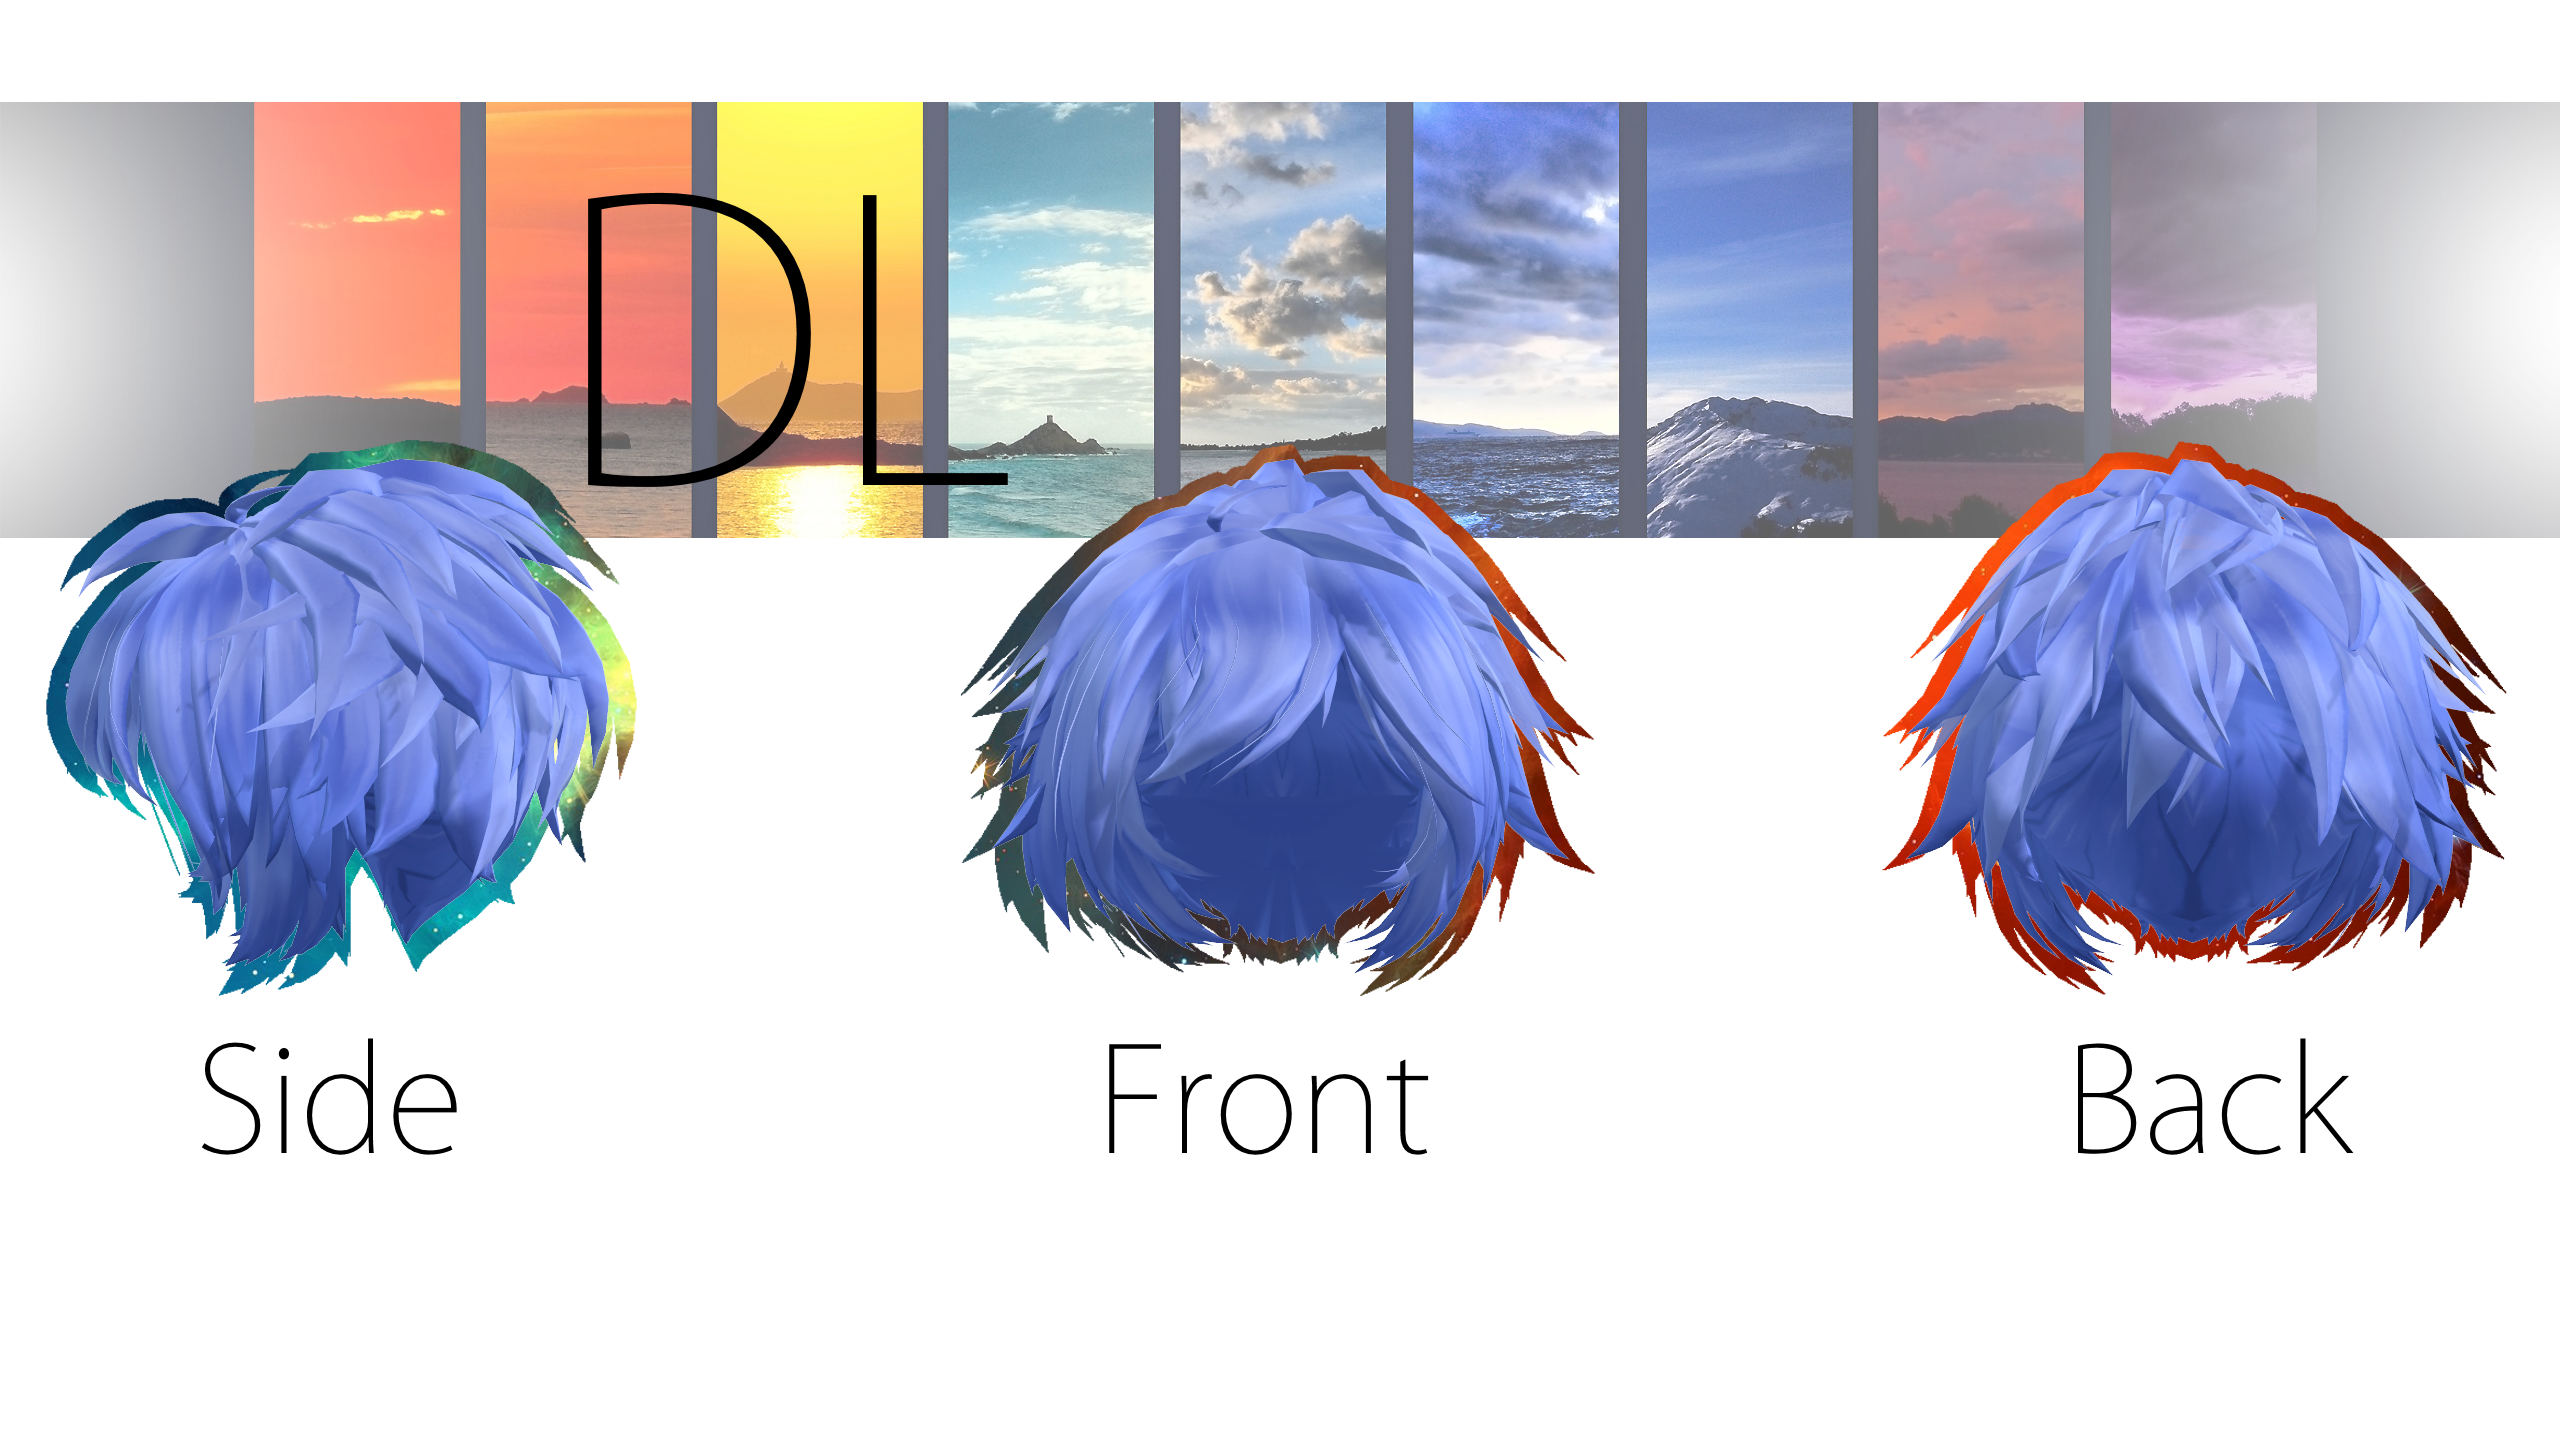 TDA Male Hair Edit [DOWNLOAD] Fixed DL by NEPHNASHINE-P on DeviantArt